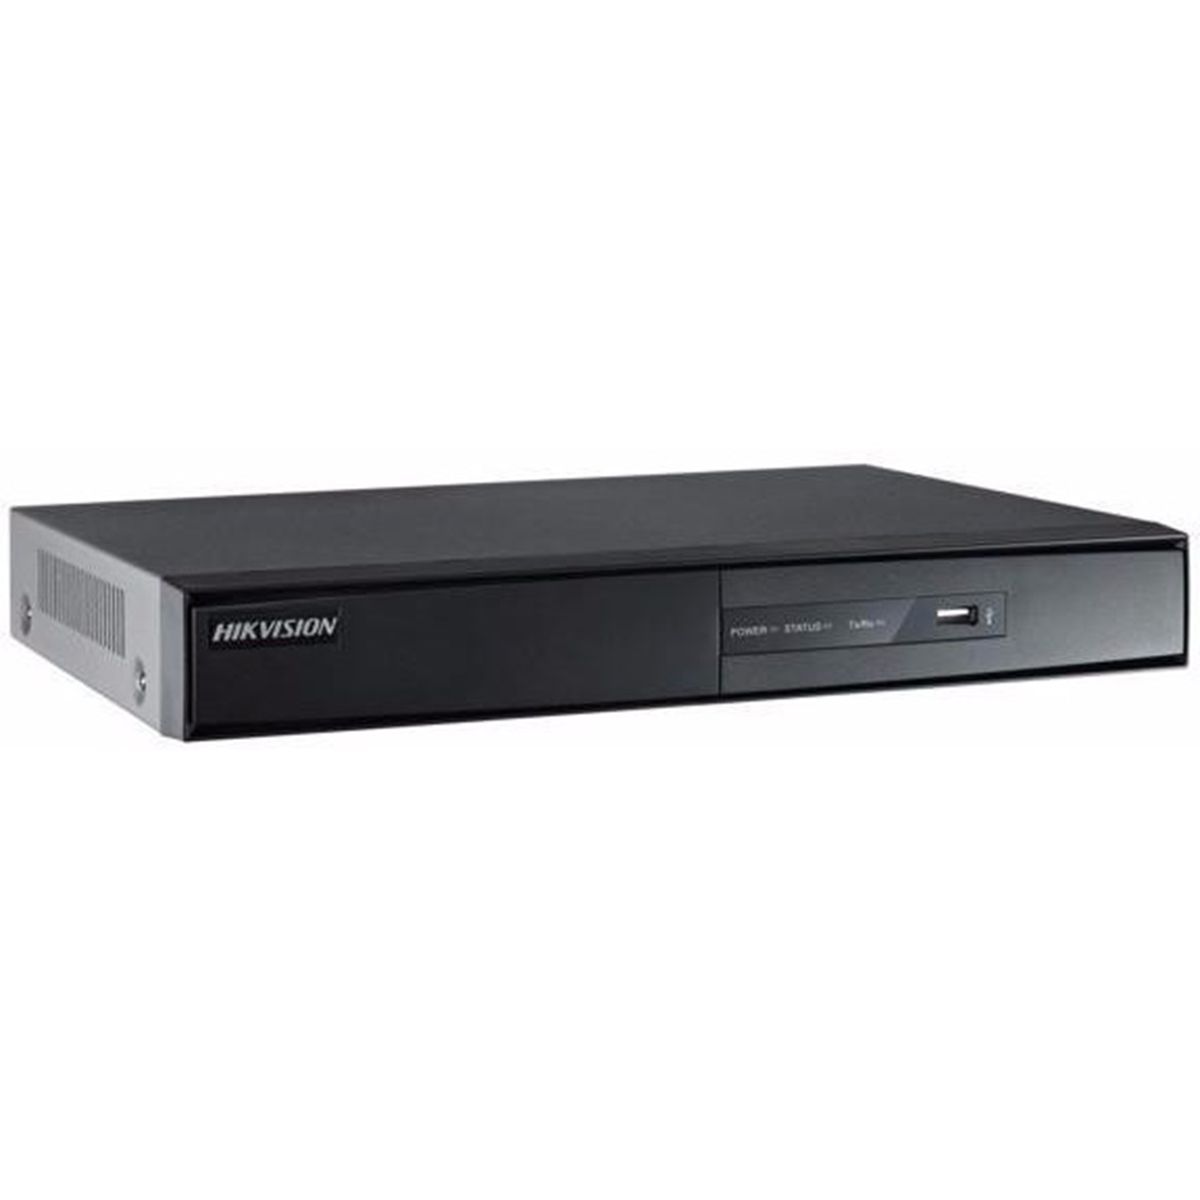 DVR Hikvision 8 canales DS-7208HGHI-F1/N